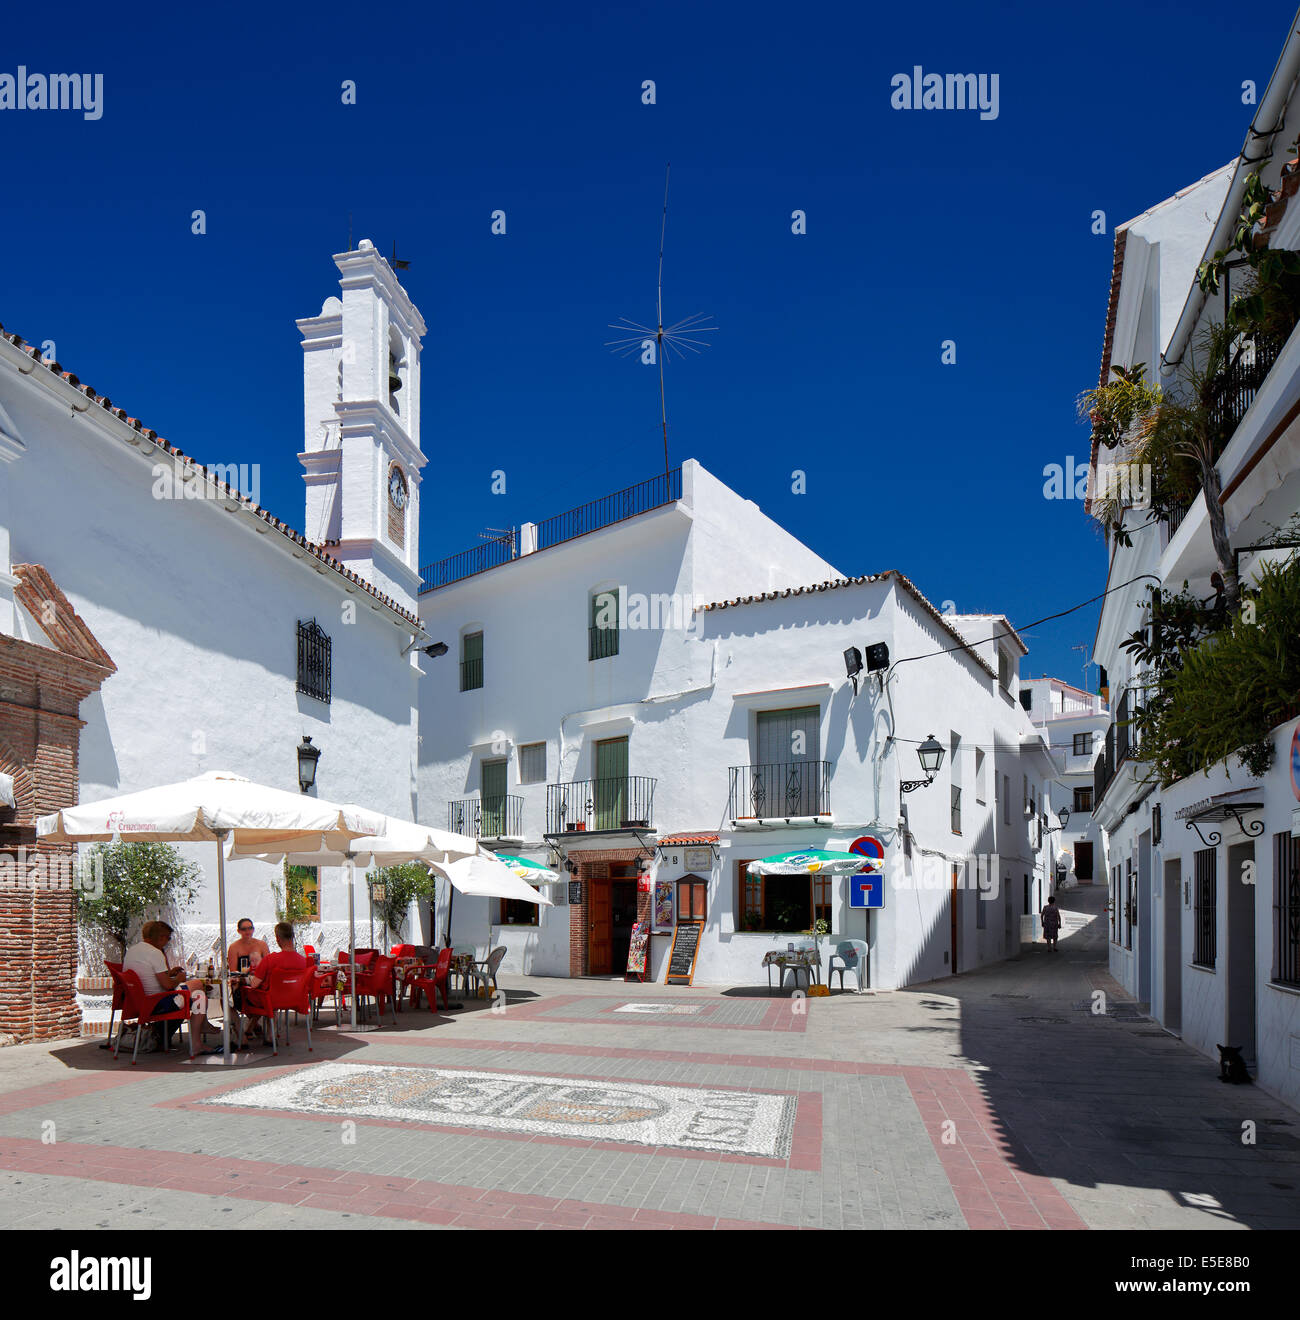 Istan is a beautiful town in the Malaga province in Andalusia, Southern Spain. It lies beneath the Sierra Blanca mountain Stock Photo